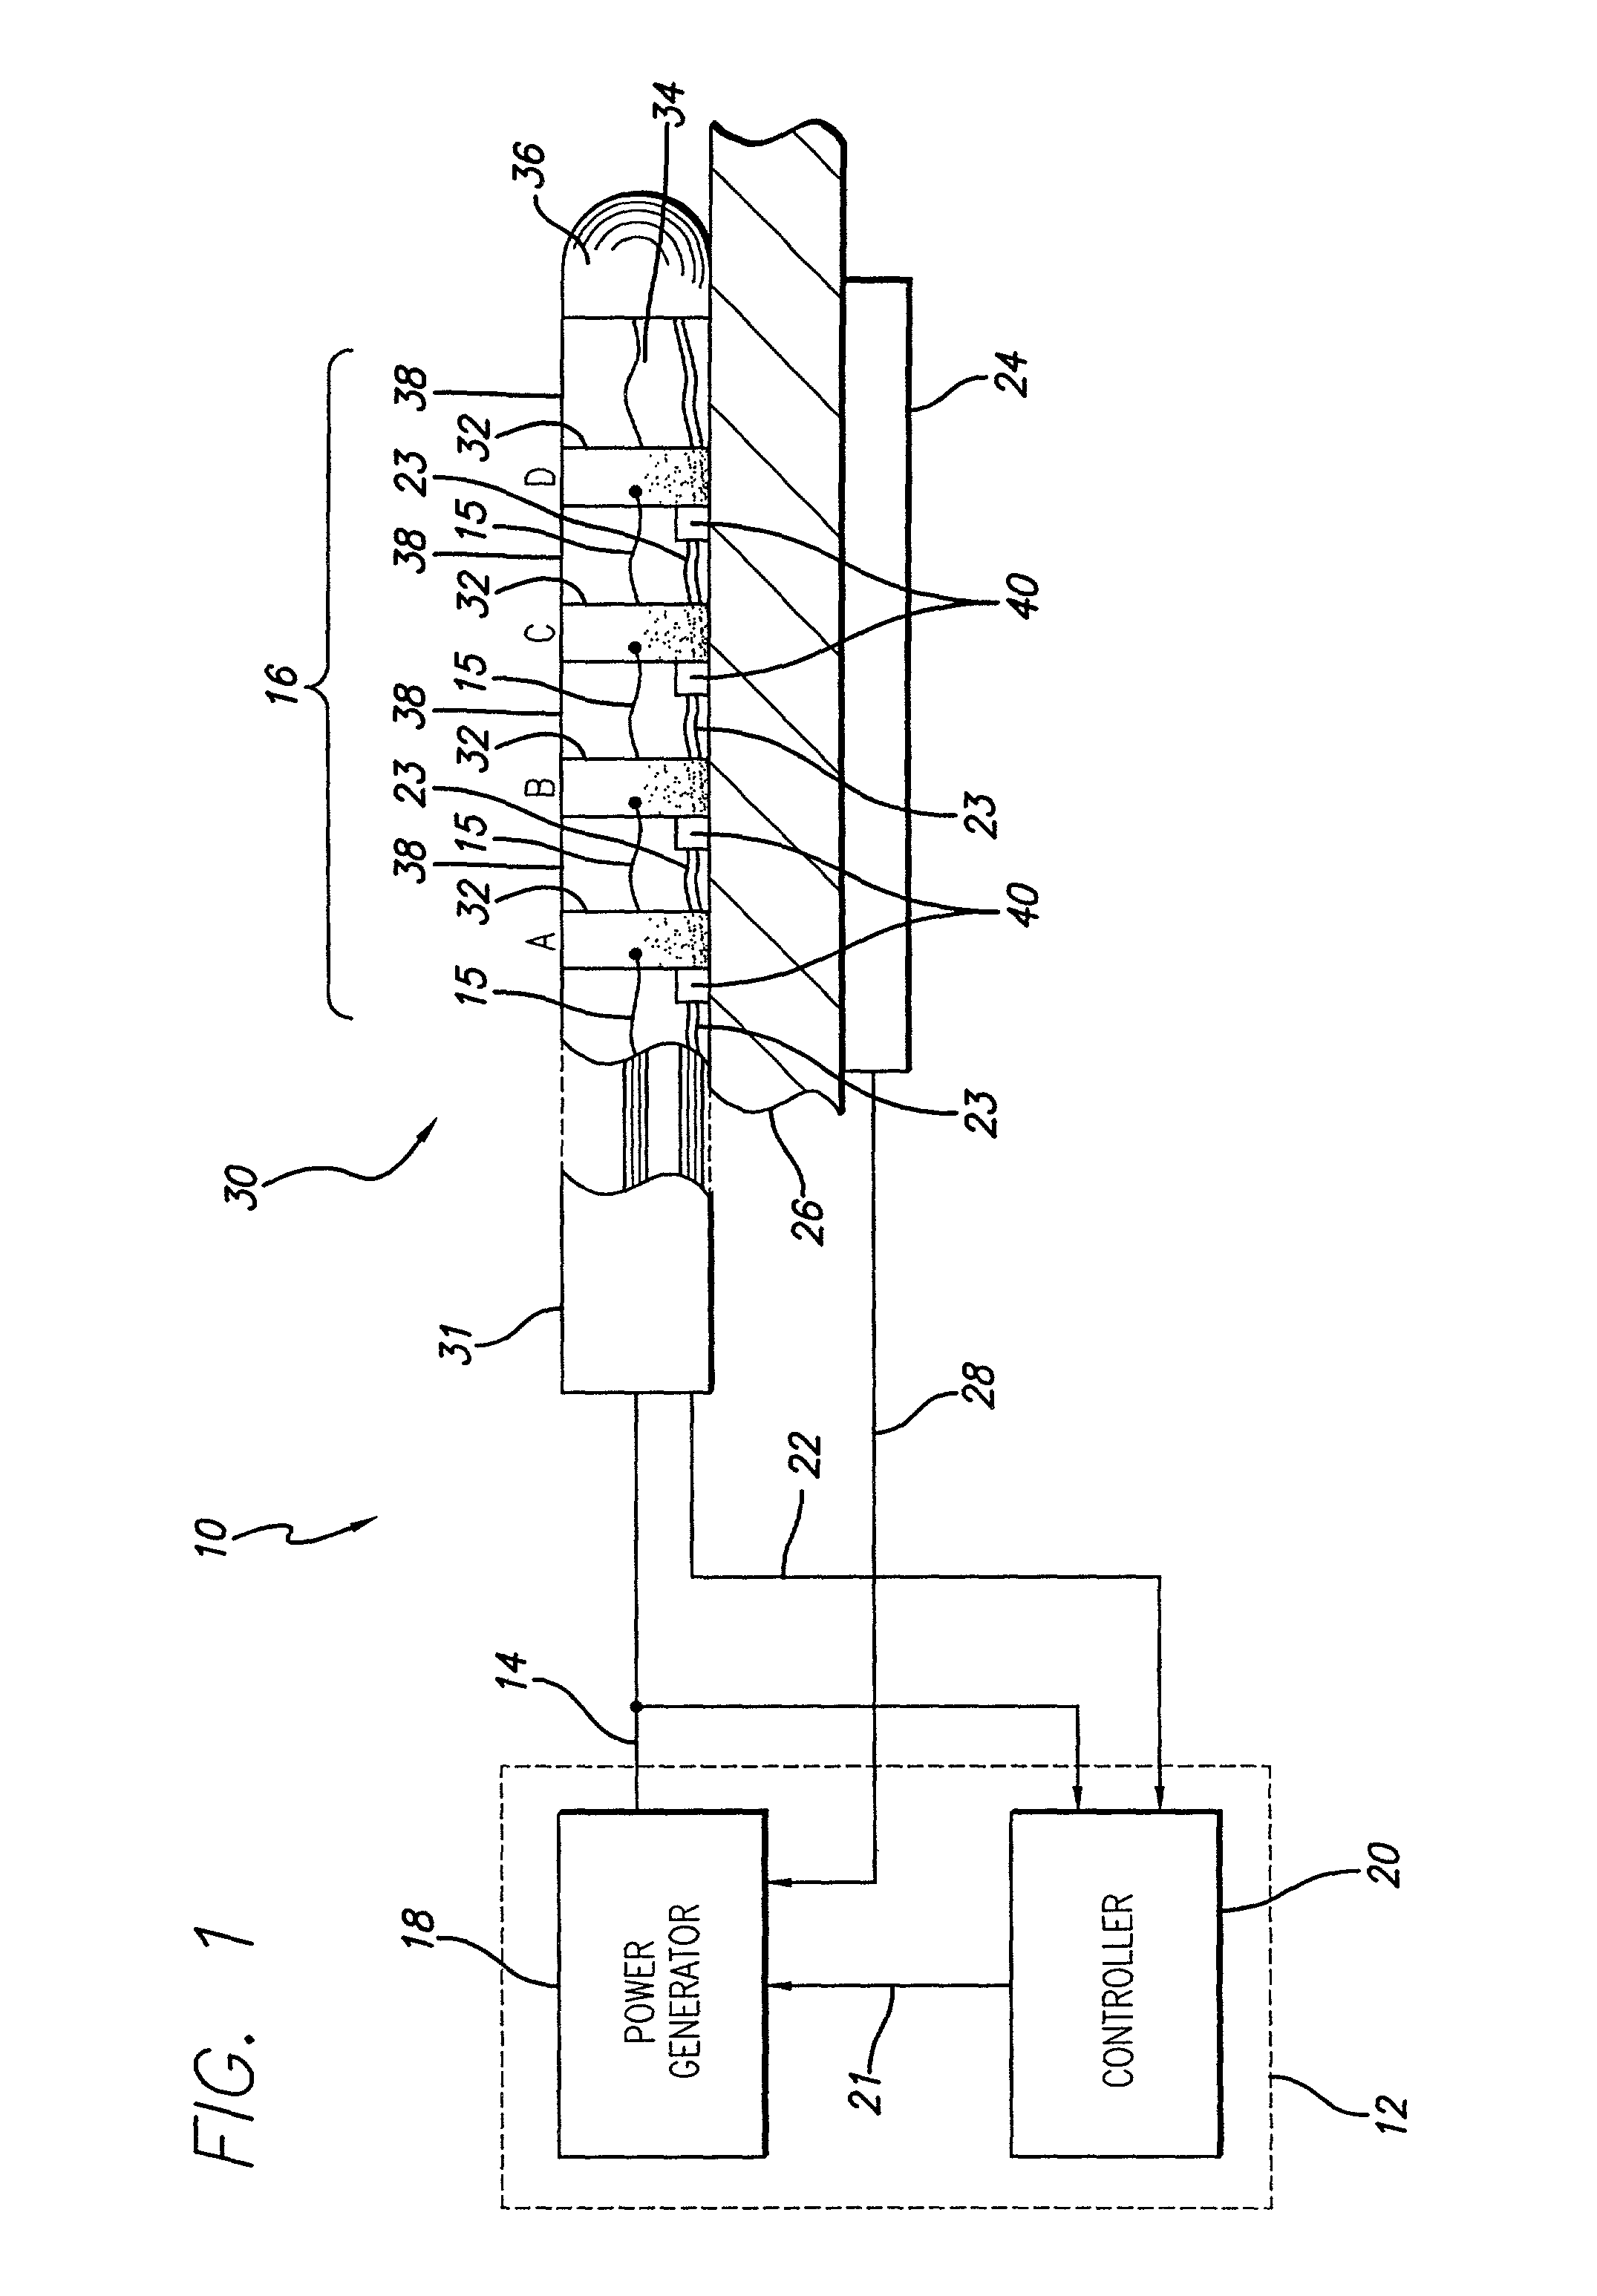 Ablation system and method having multiple-sensor electrodes to assist in assessment of electrode and sensor position and adjustment of energy levels